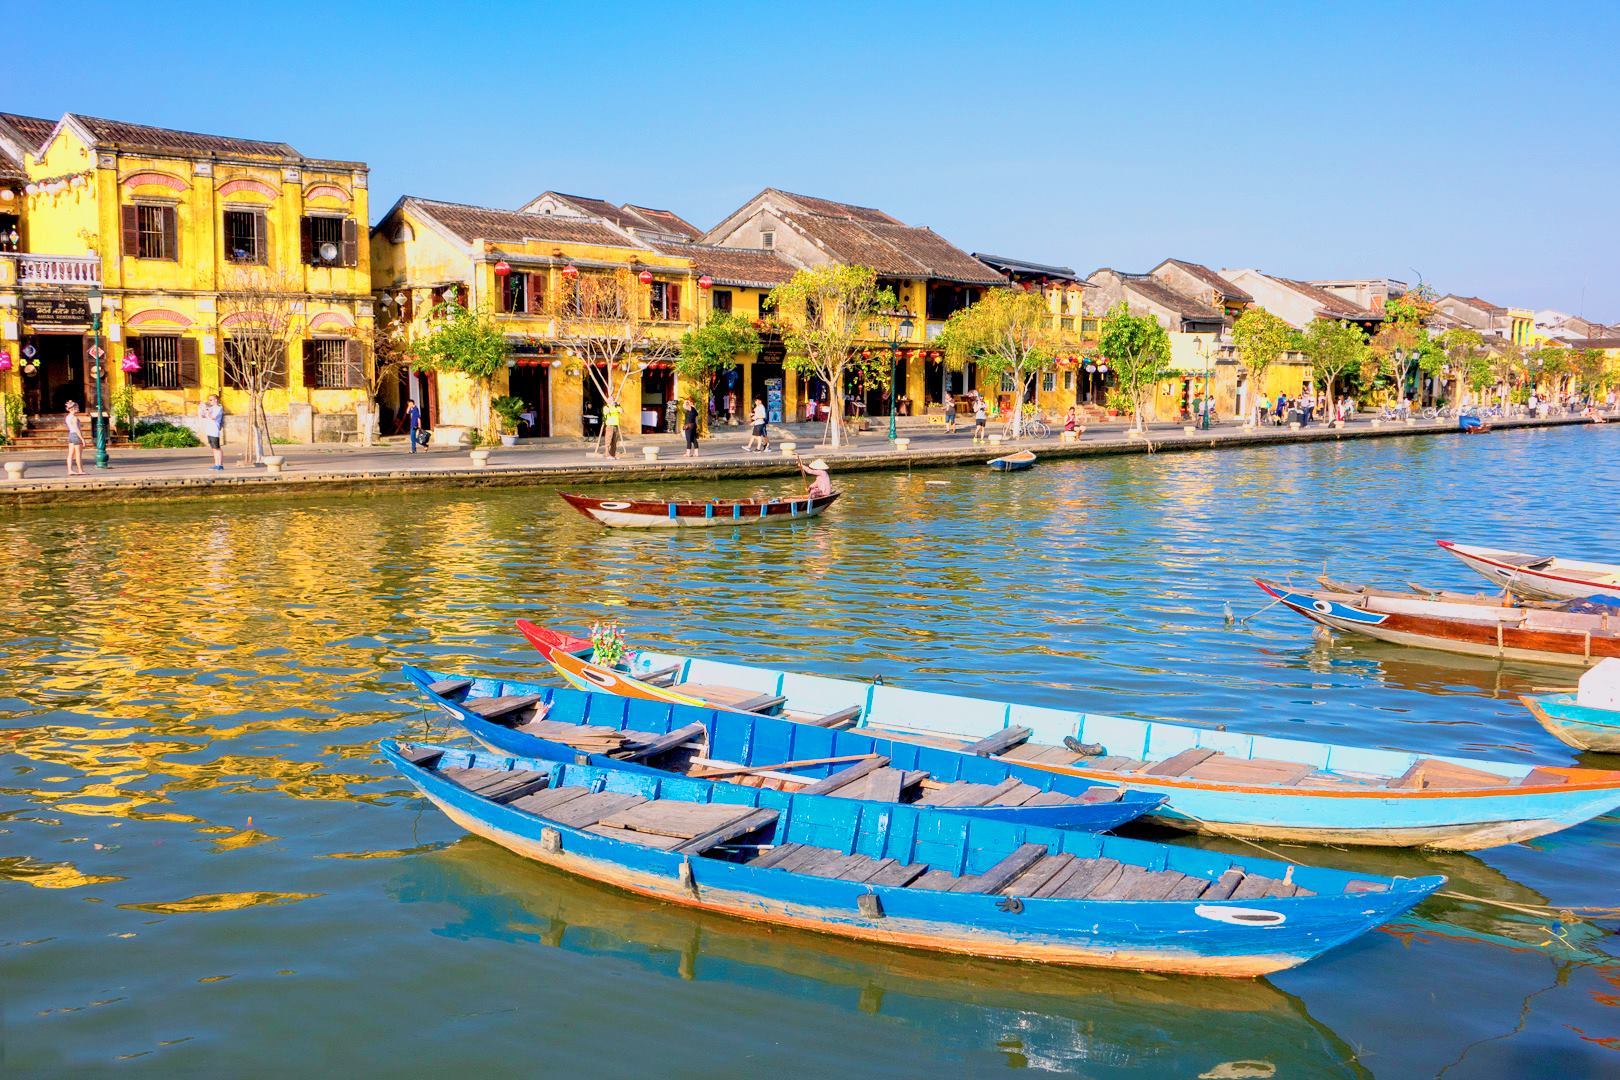 Hoi An Walking Tour, Foot Massage 60 minutes and Hoi An Speciality Lunch Voucher